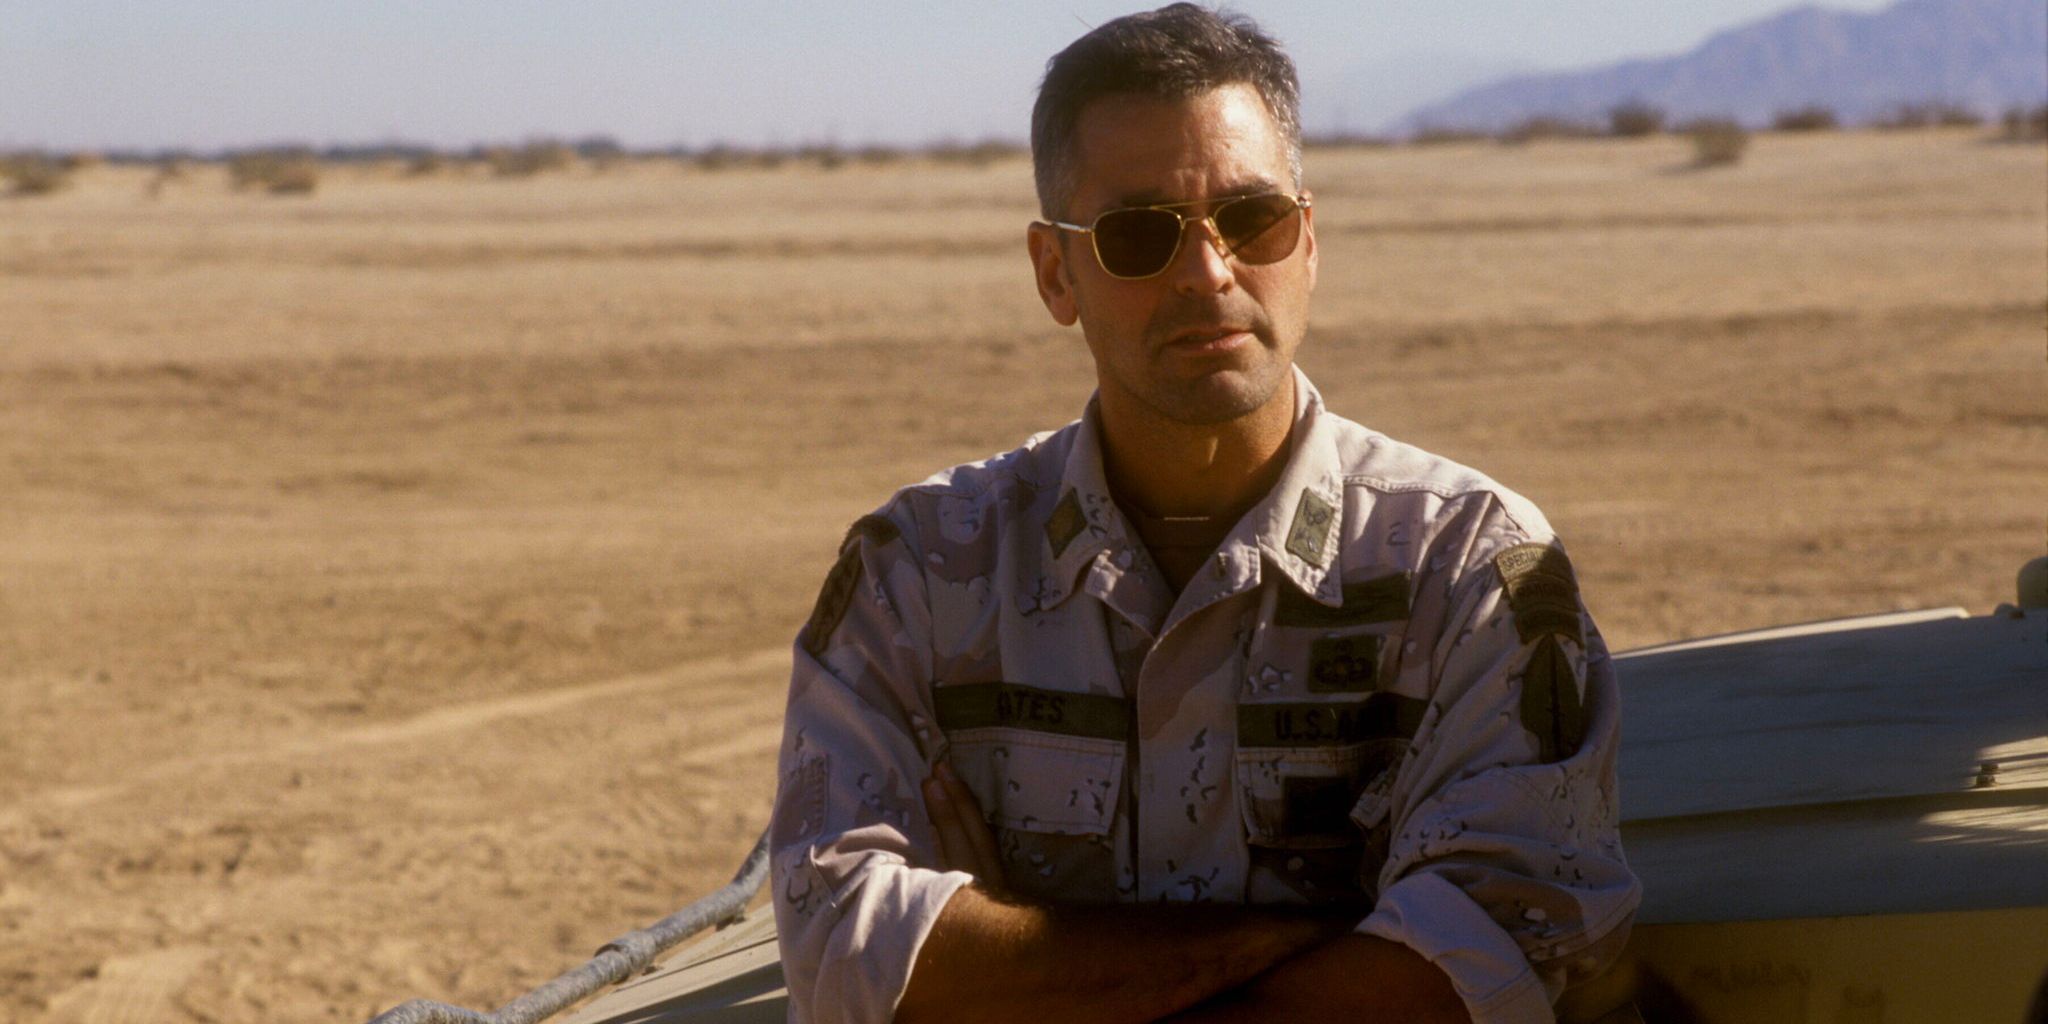 An American army man stands against a military vehicle with a barren desert behind him.